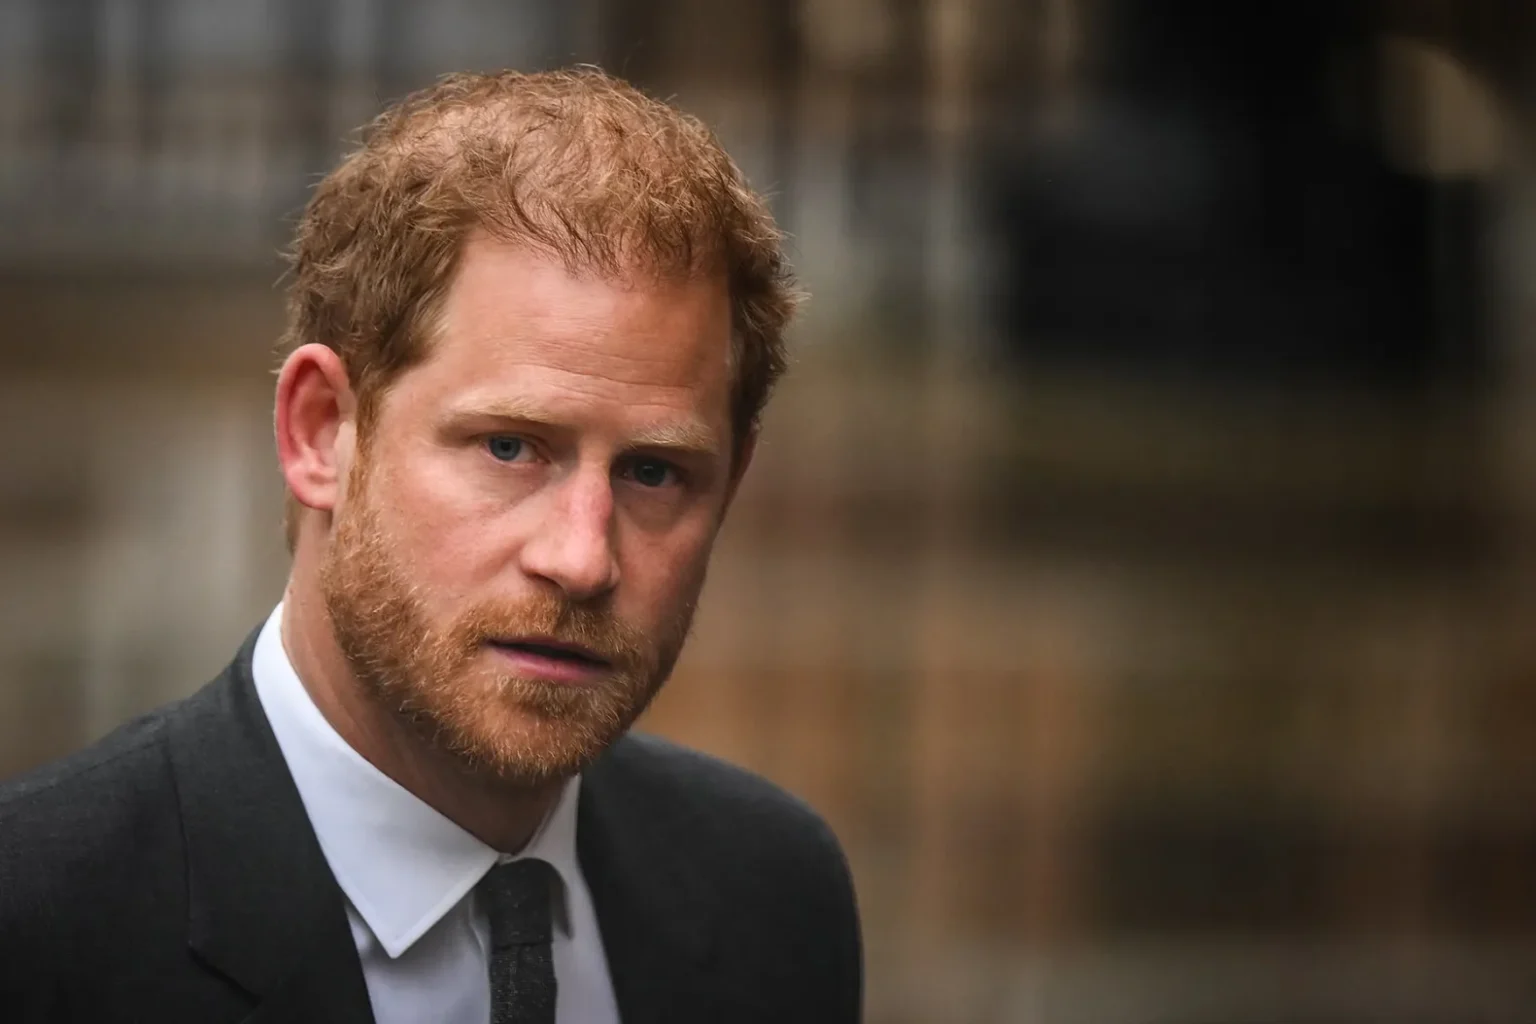 prince-harry-adamant-for-permanent-residence-in-uk-amid-security-case